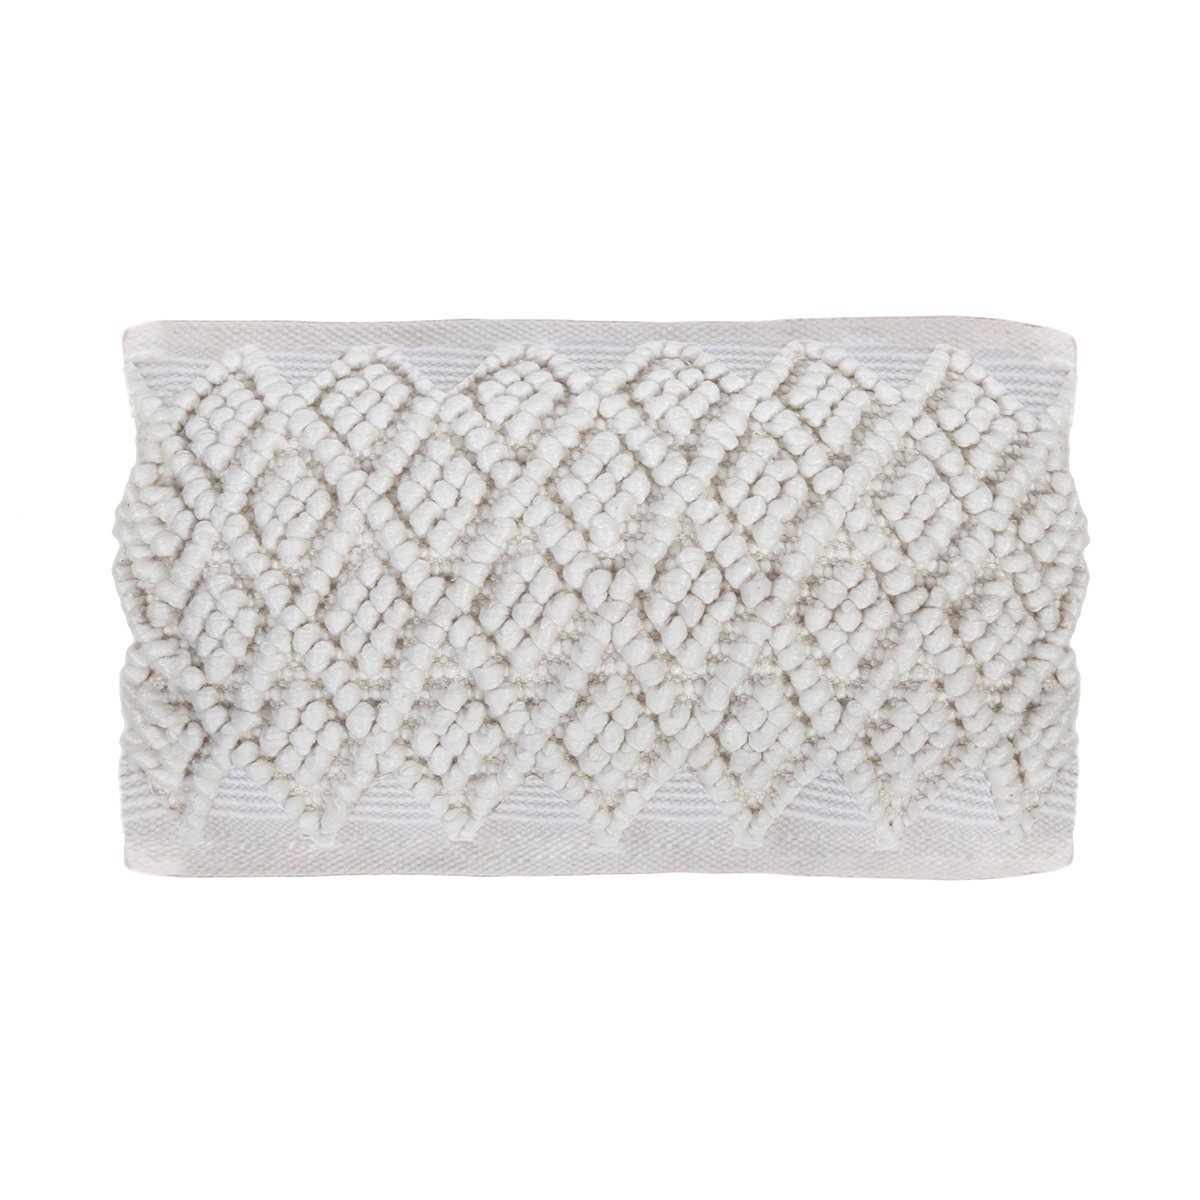 Ariel Hand Woven Big Pillow by Pom Pom at Home